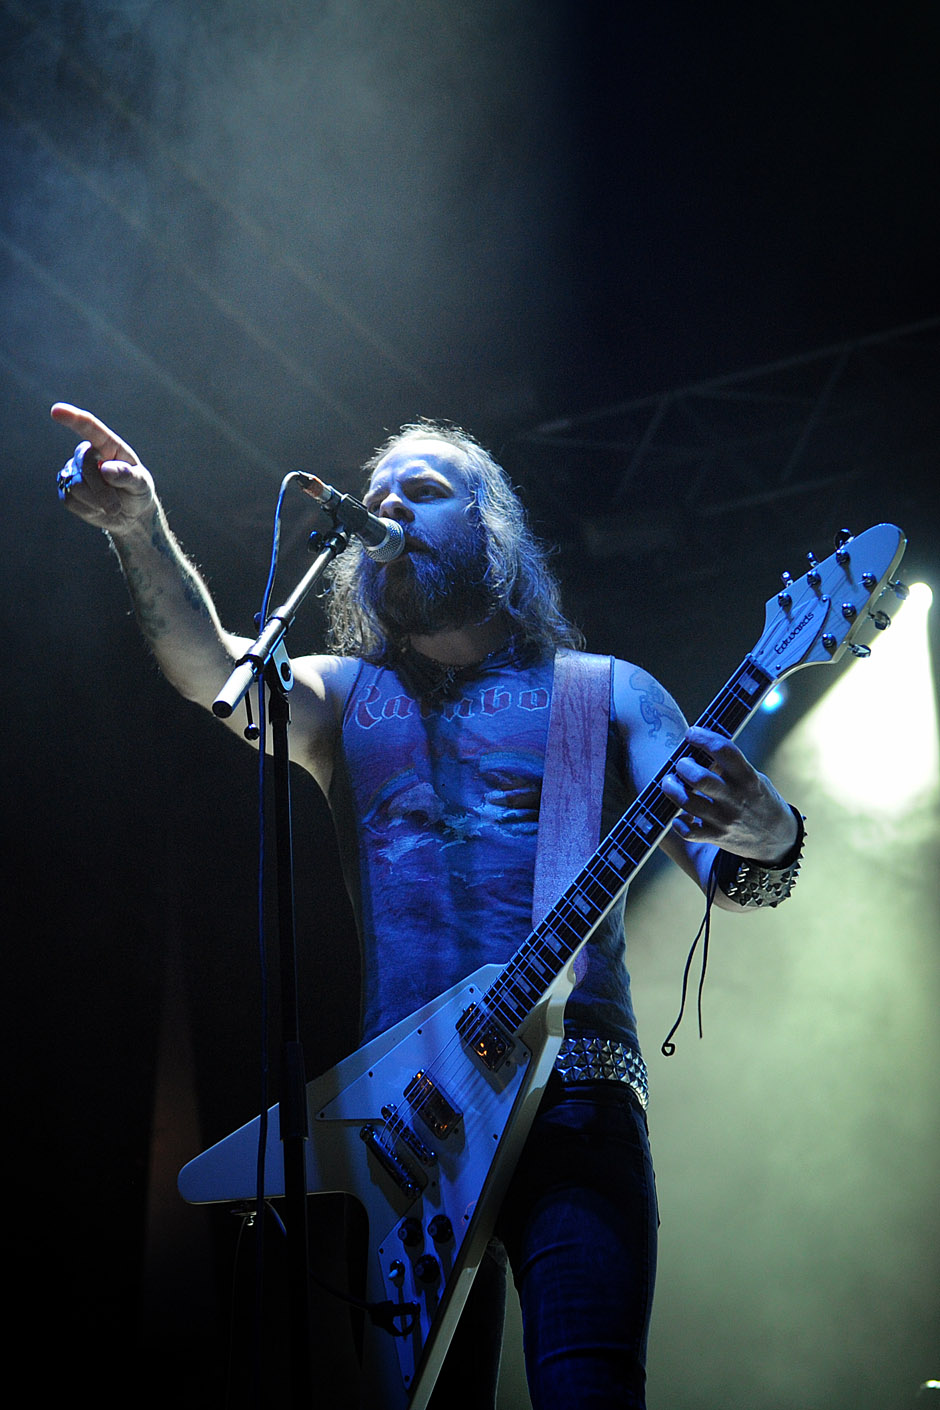 Grand Magus live, 16.11.2013, METAL HAMMER PARADISE